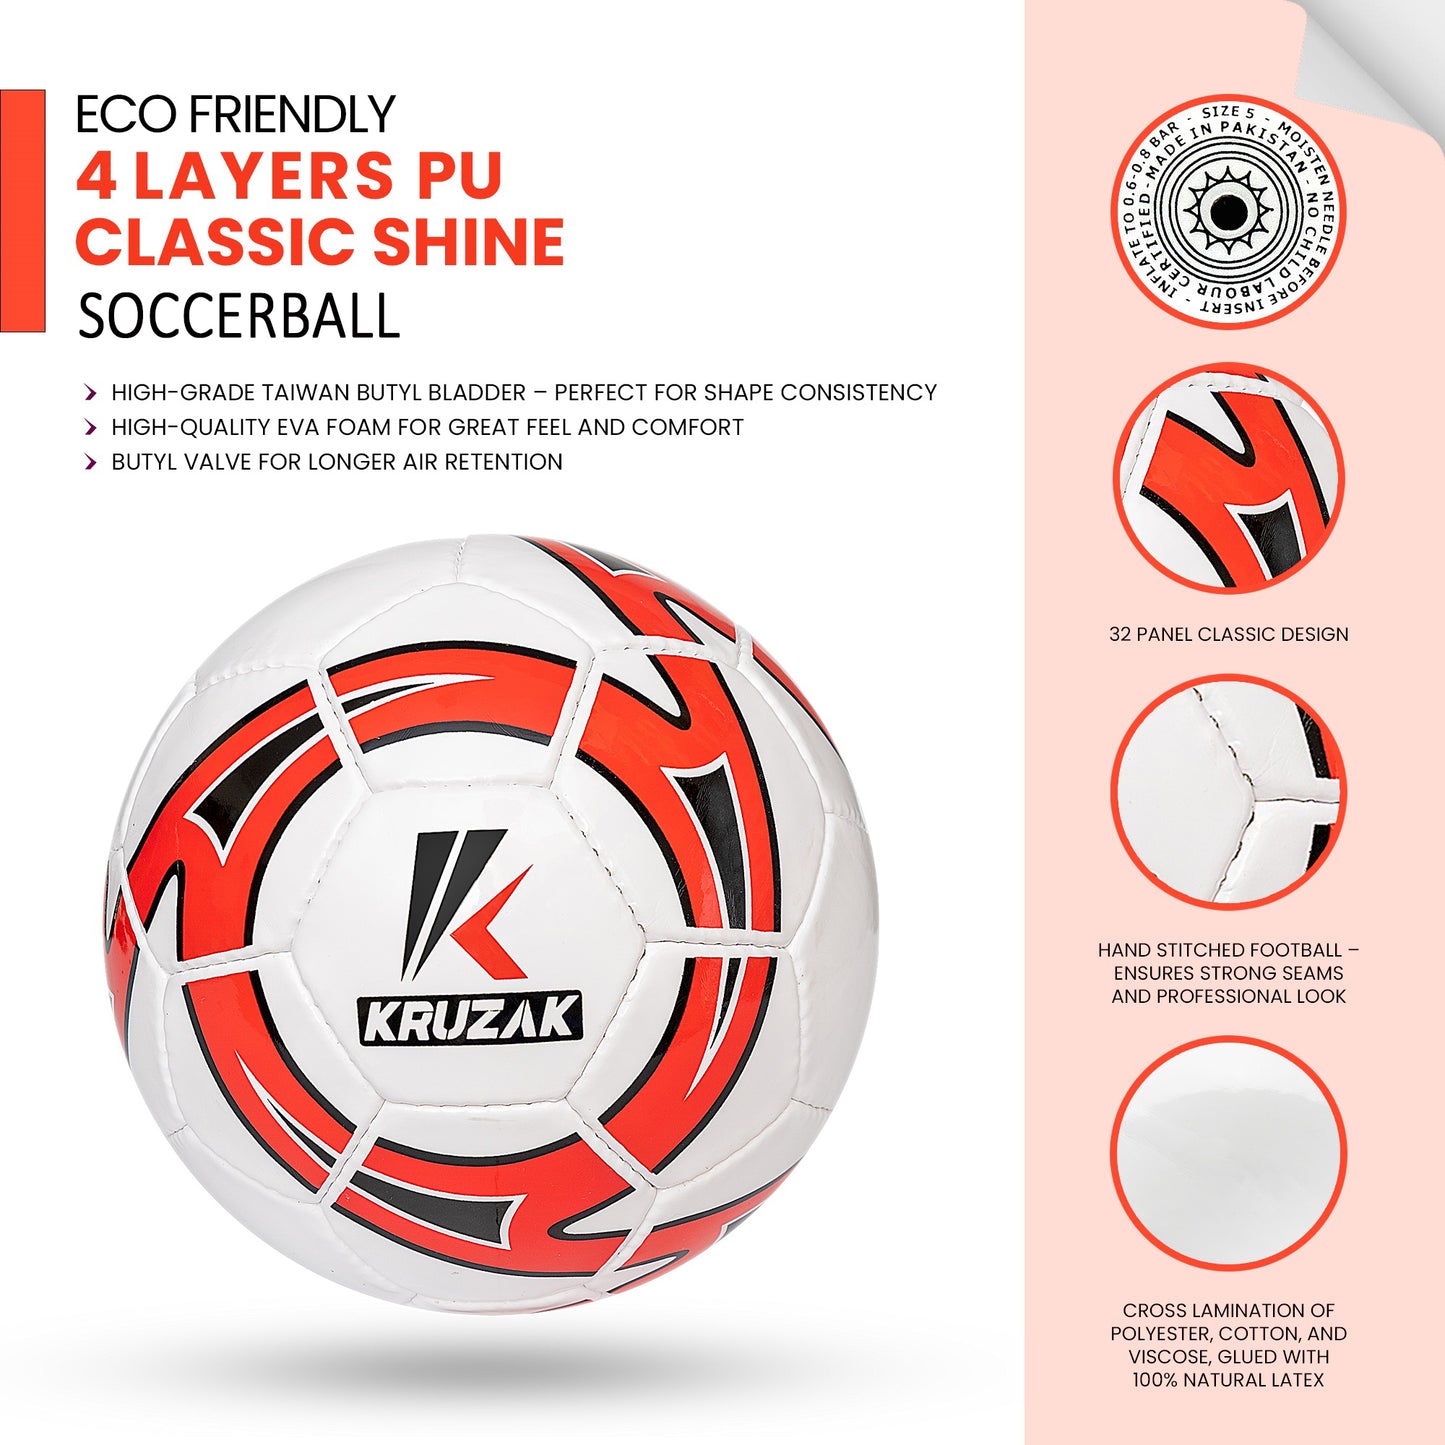 Kruzak Classic Official Size 5 Red Soccer Ball - Hand Stitched Match Ball for Professional Training - for Men, Women, Youth Boys & Girls Soccer Players